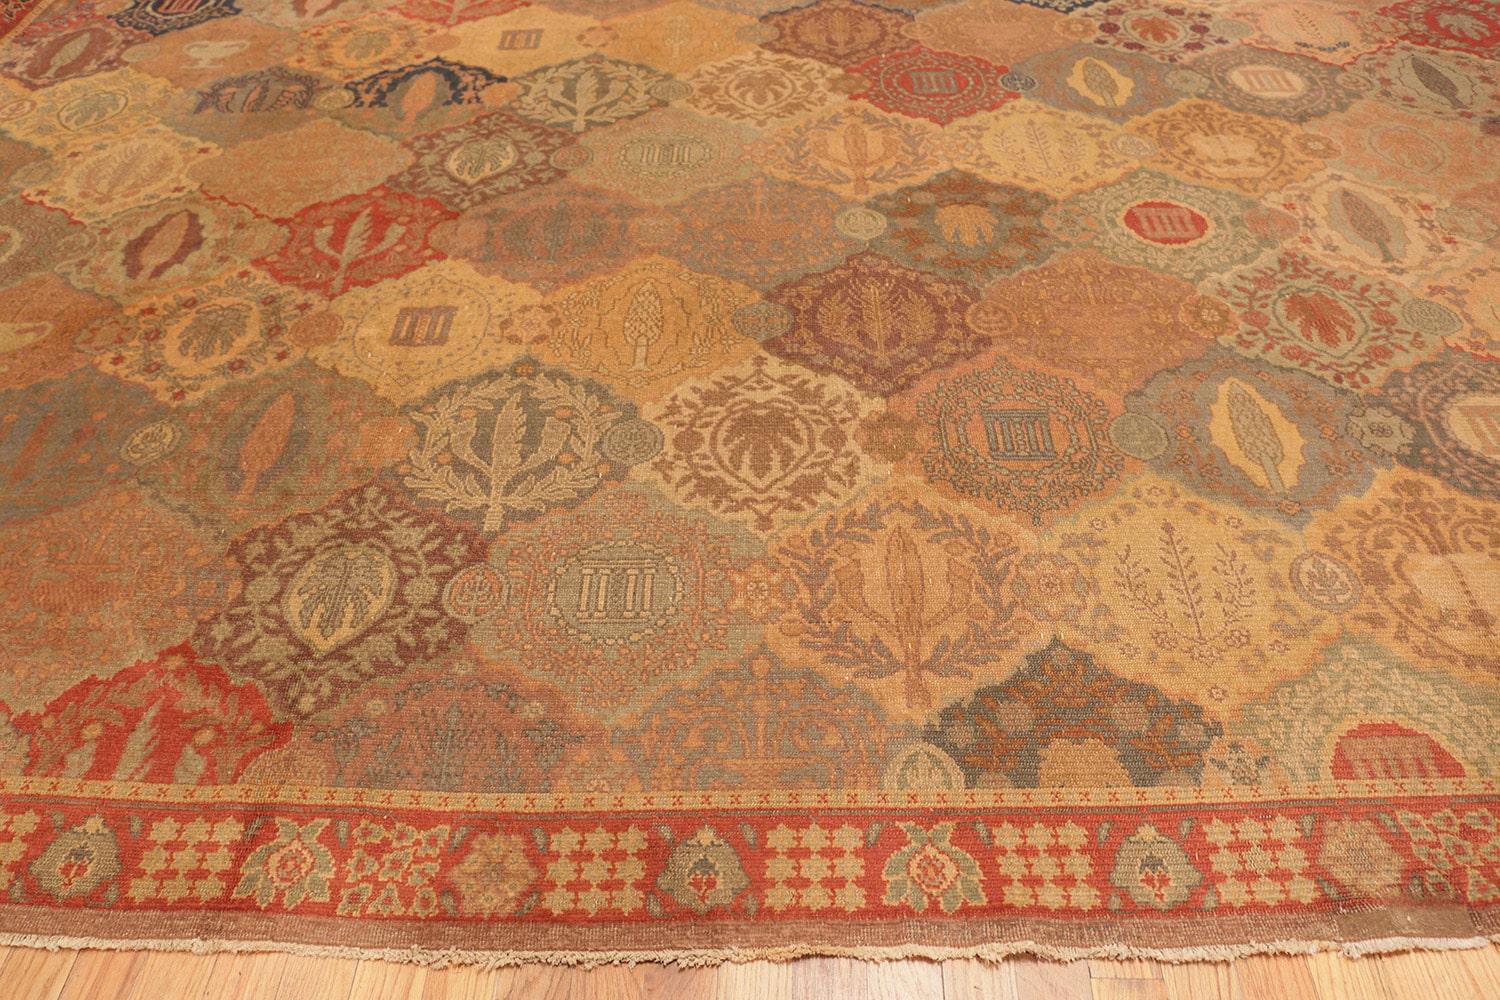 Art Nouveau Nazmiyal Collection Antique Israeli Bezalel Carpet. 15 ft 9 in x 17 ft 10 in